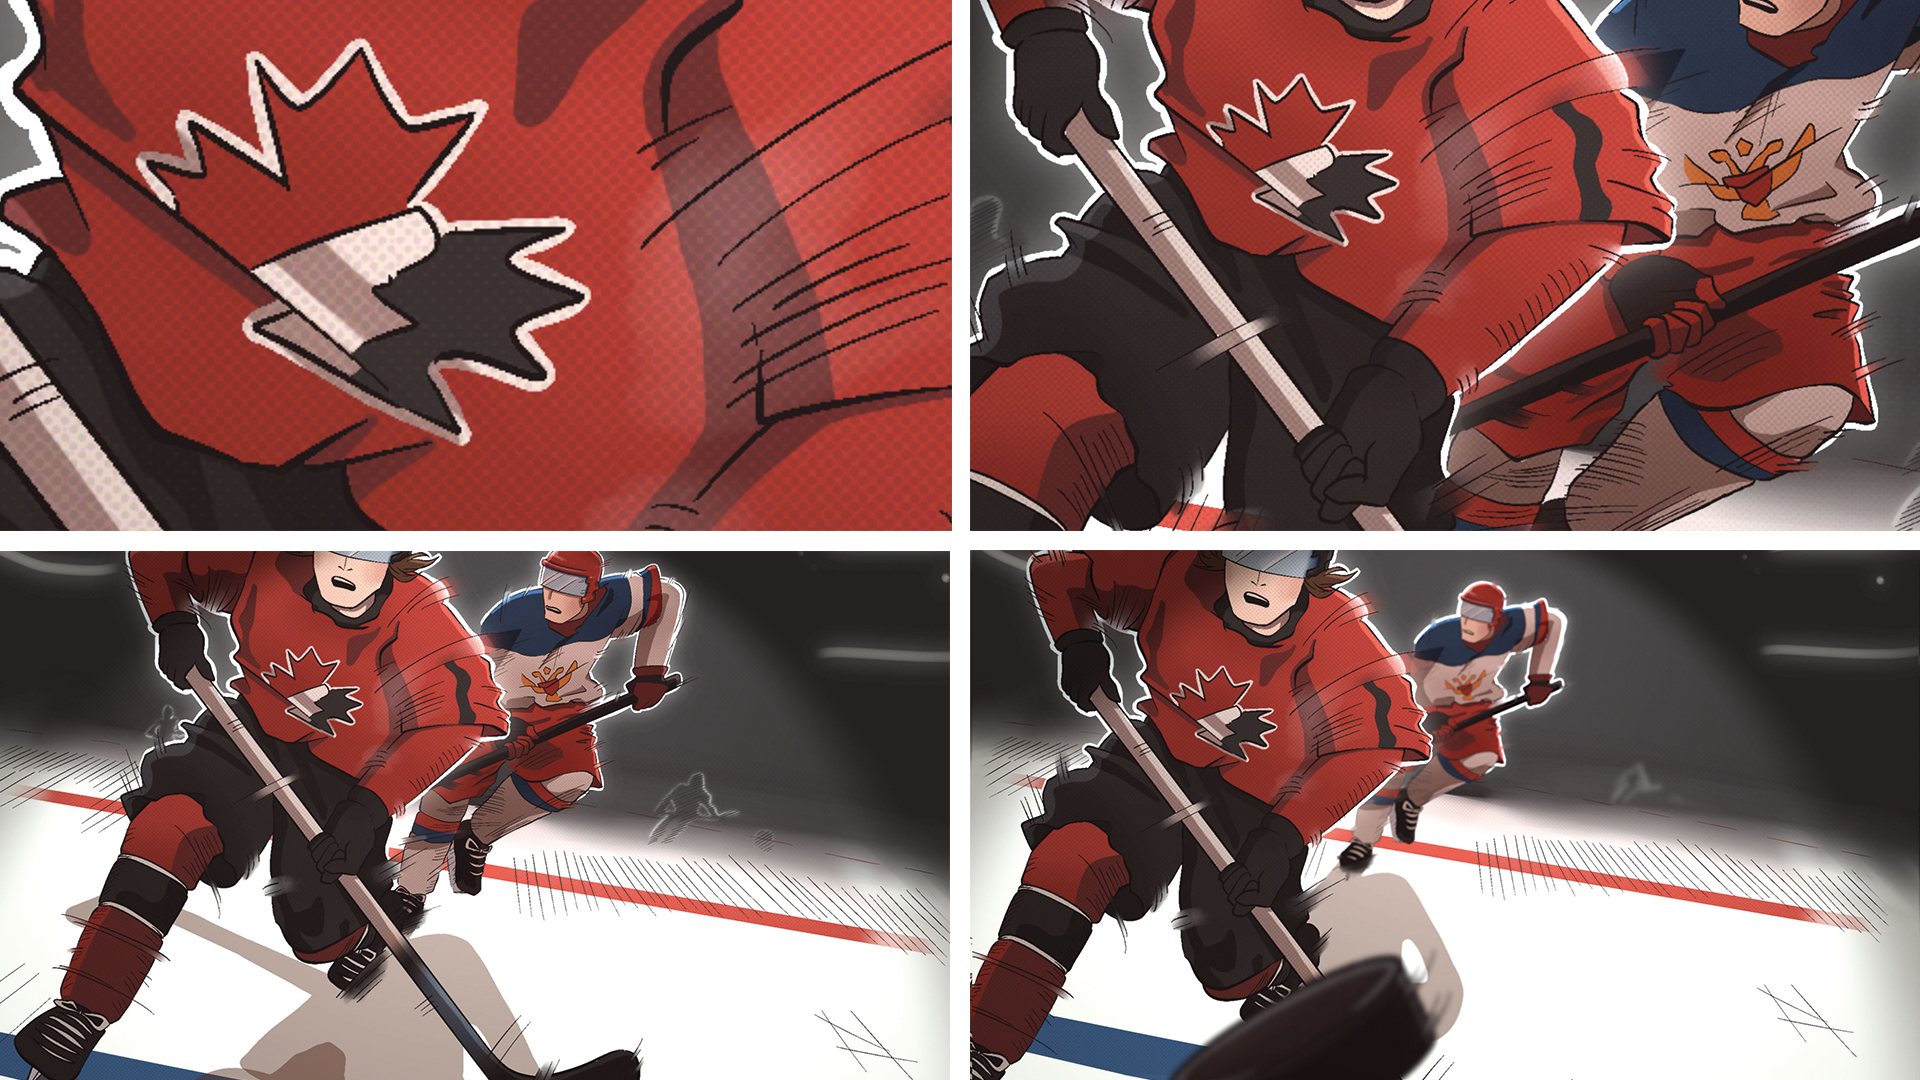 Motion illustration of a Canadian hockey player bypassing his Swedish opponent for control of the puck during the Olympics.